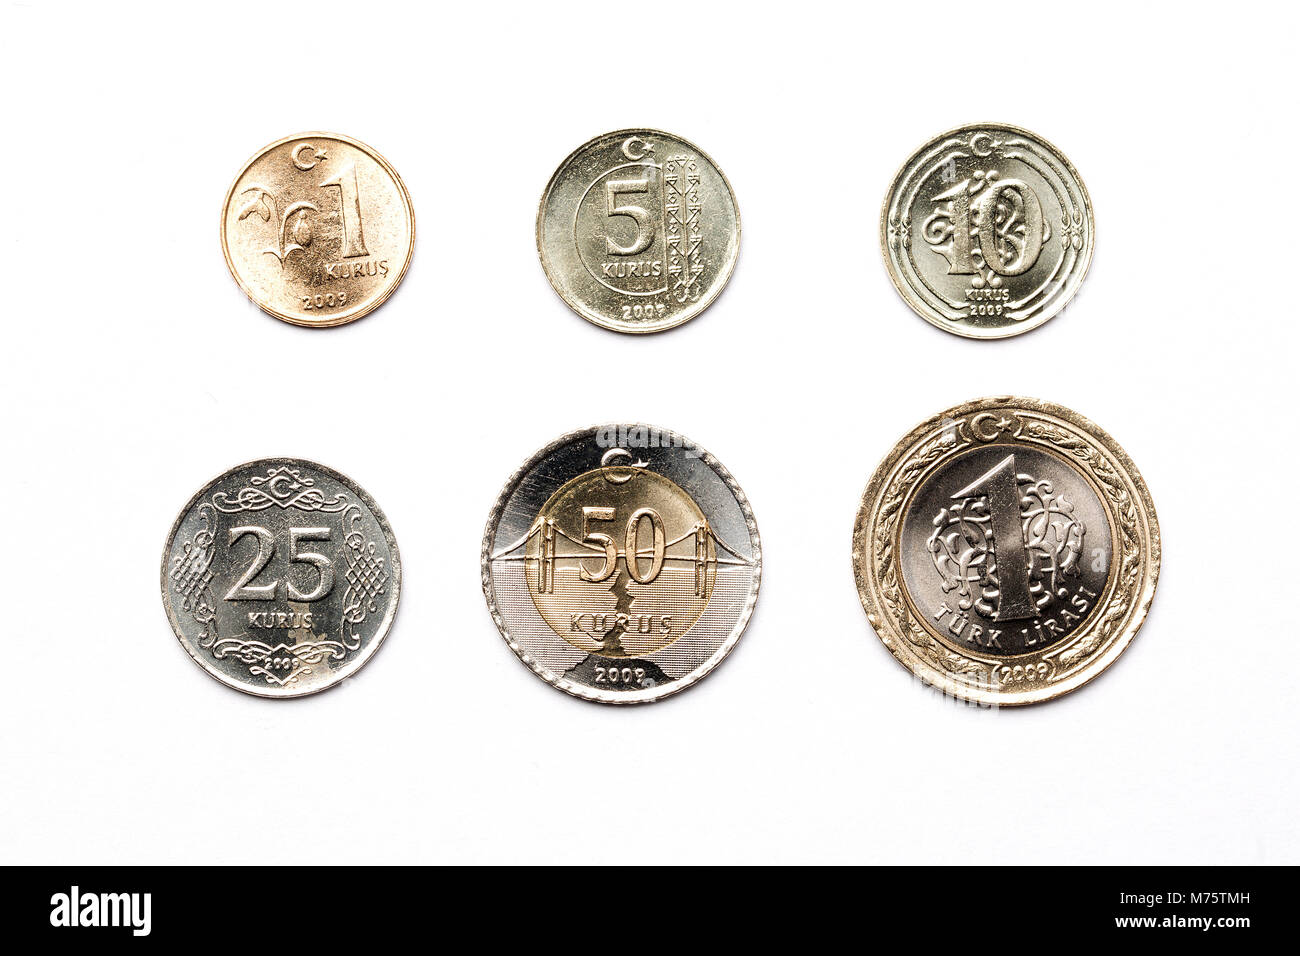 Turkish coins on a white background Stock Photo